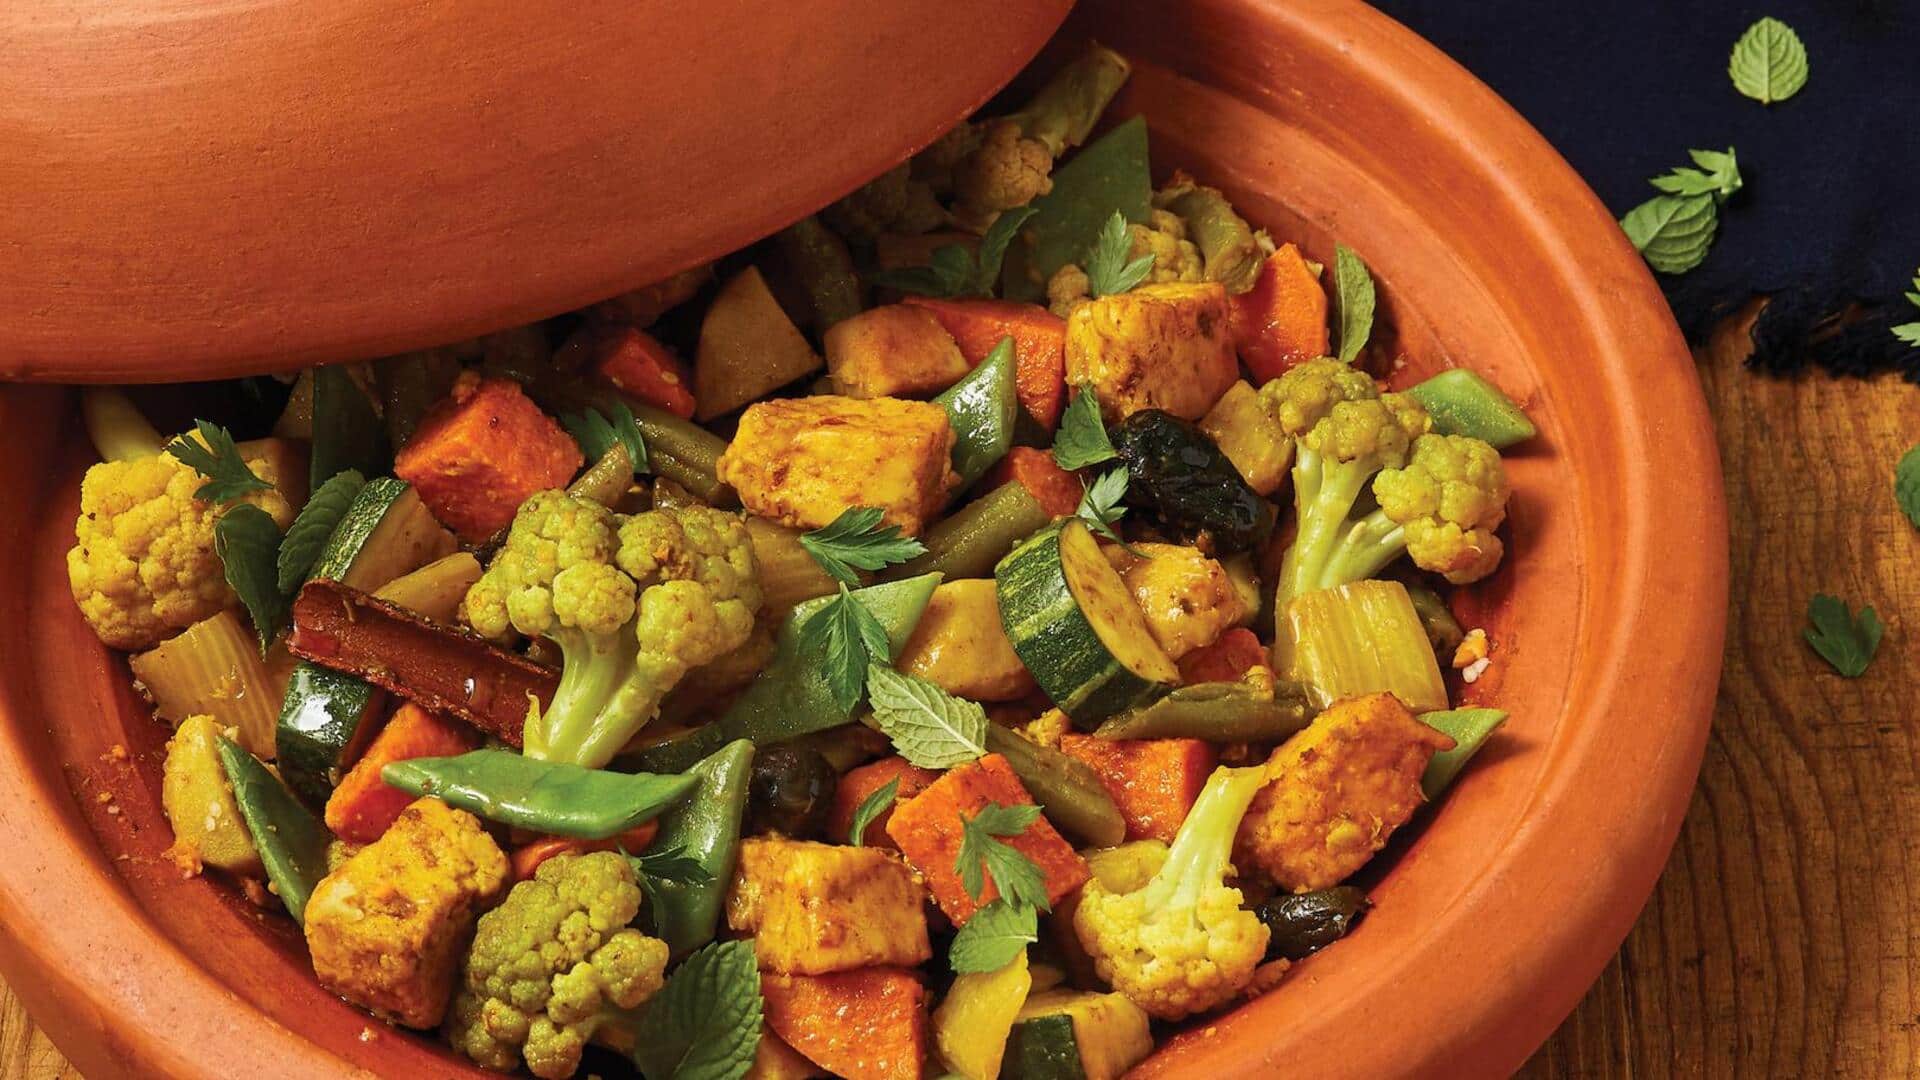 Recipe: This Moroccan vegetable tagine will surely impress your guests